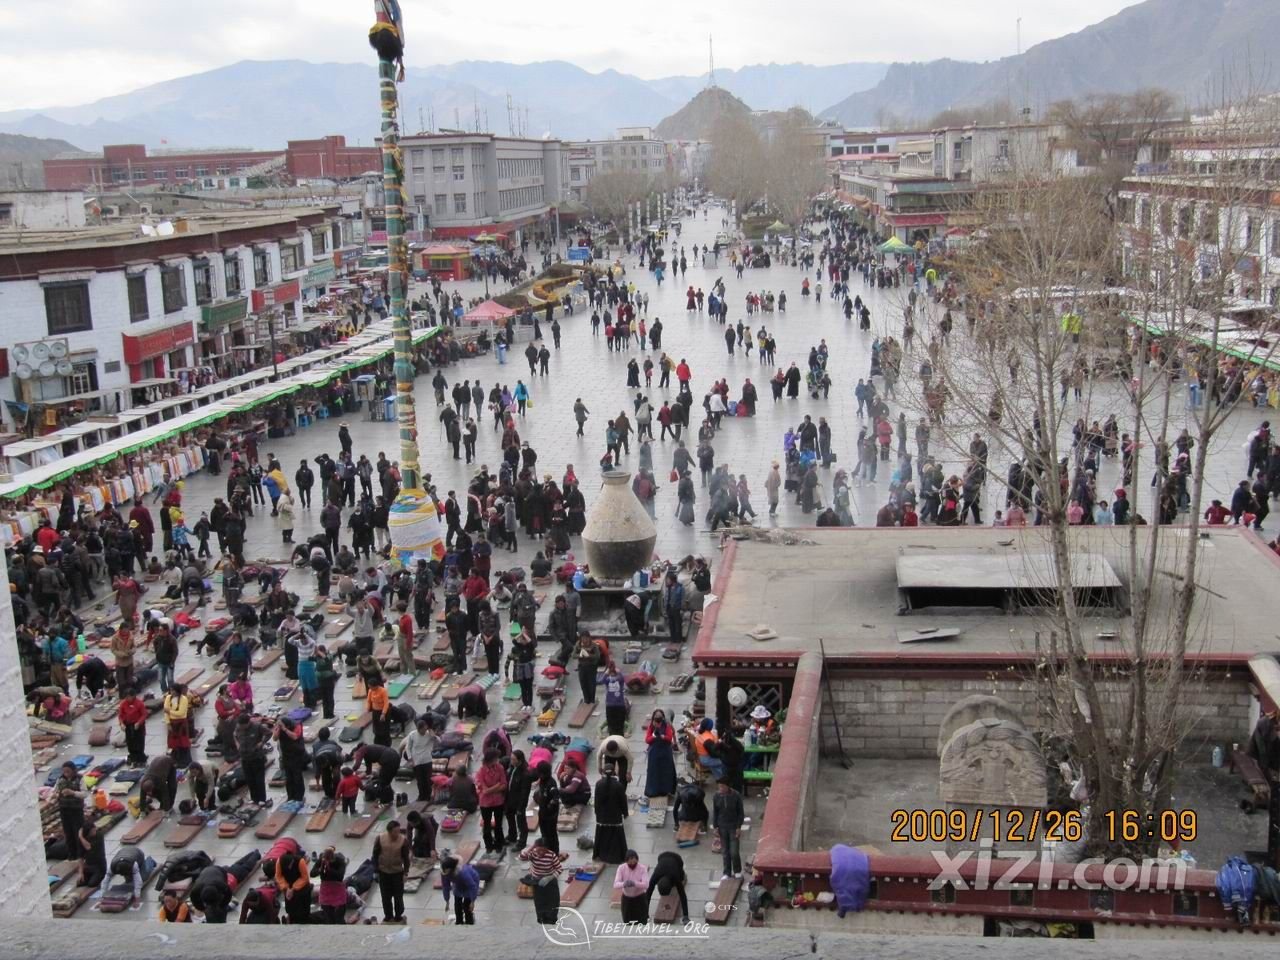 Lhasa sees thousands of pilgrims in winter